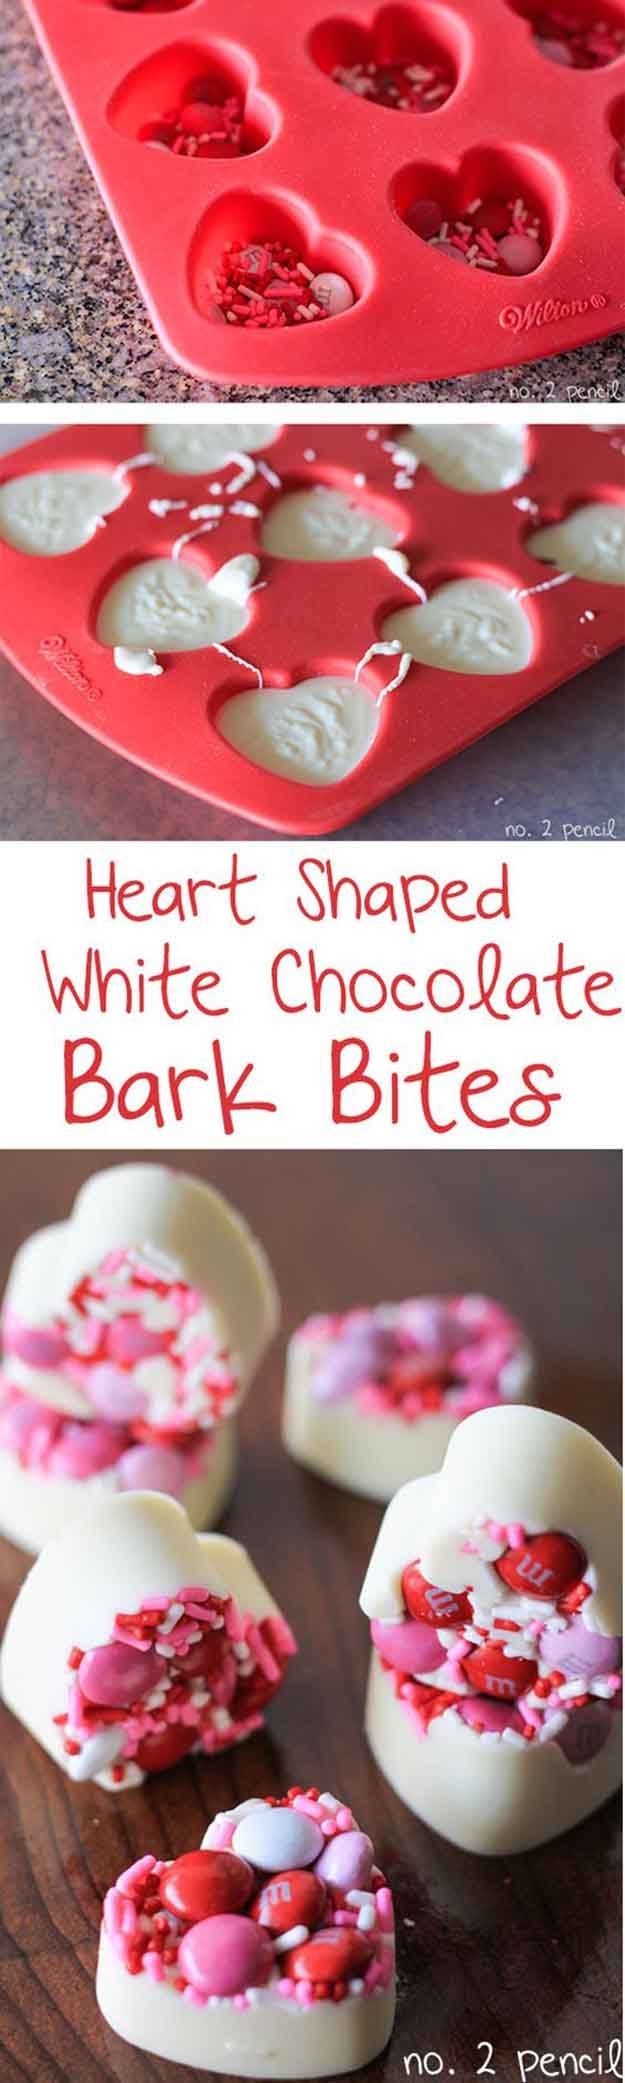 Heart Shape White Chocolate Bark Bites|25 Valentines Day Treats That Look Way Too Good to Eat,see more at: diyready.com/…